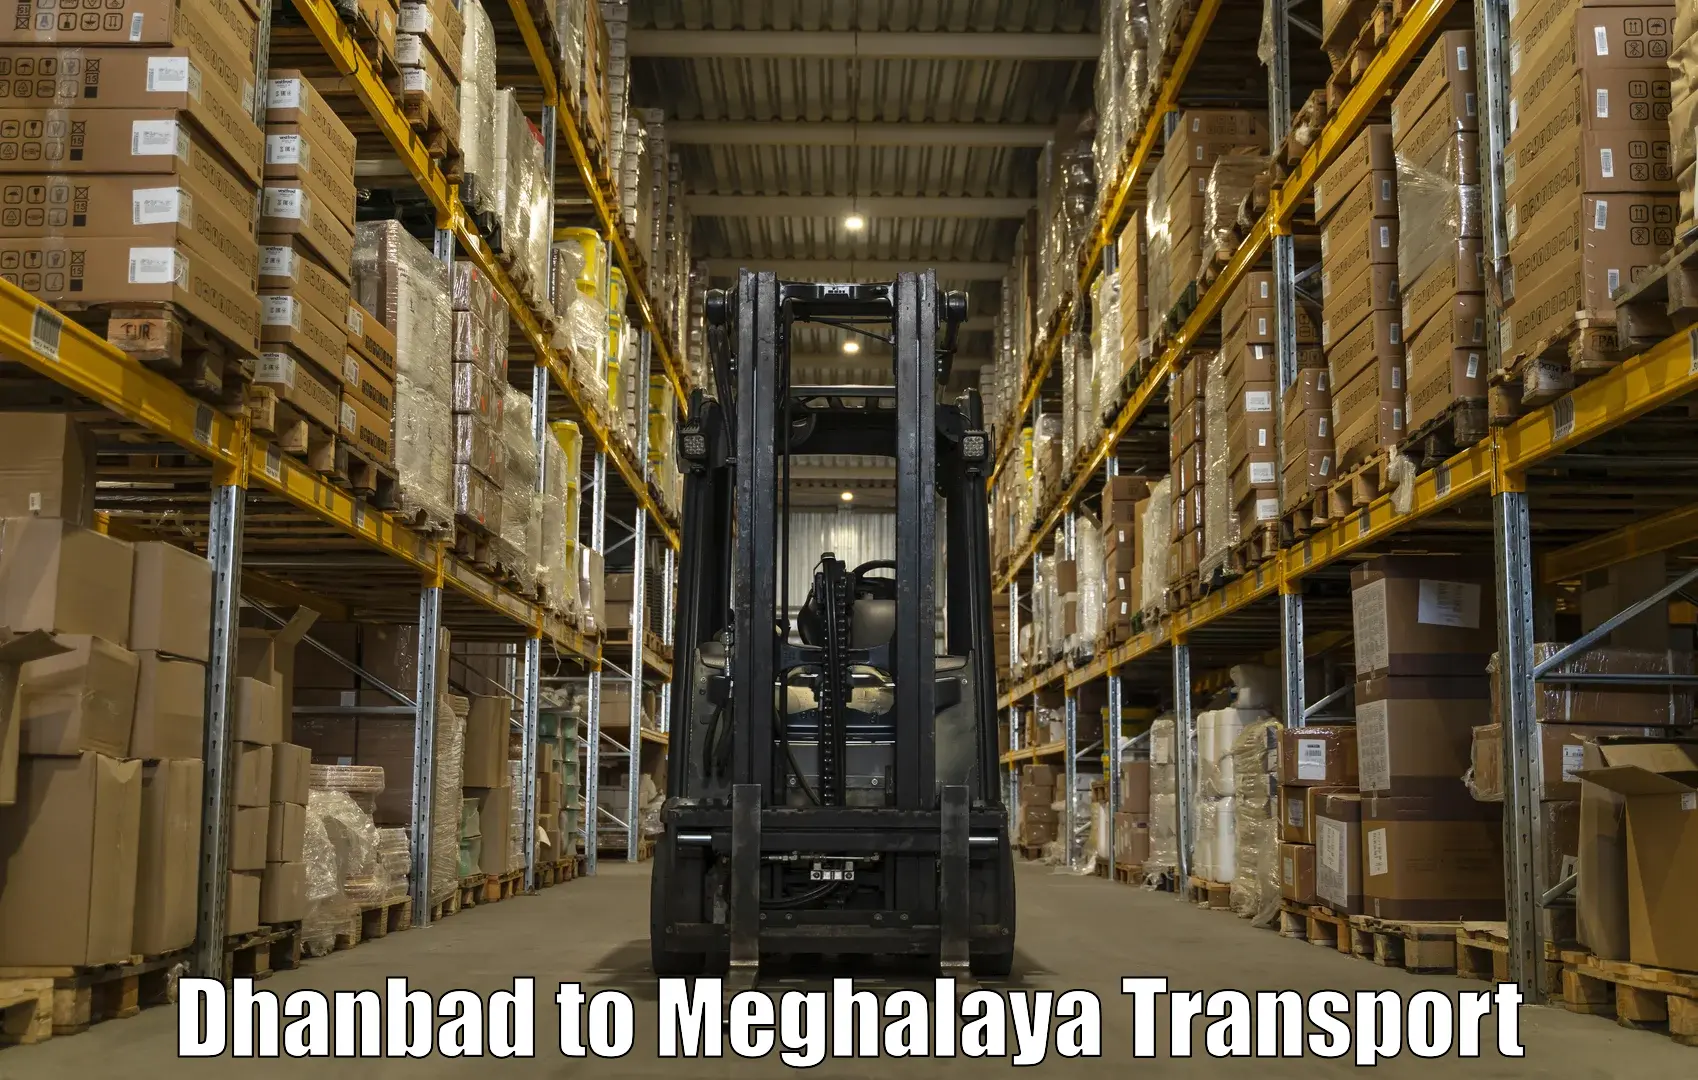 Air freight transport services Dhanbad to Meghalaya